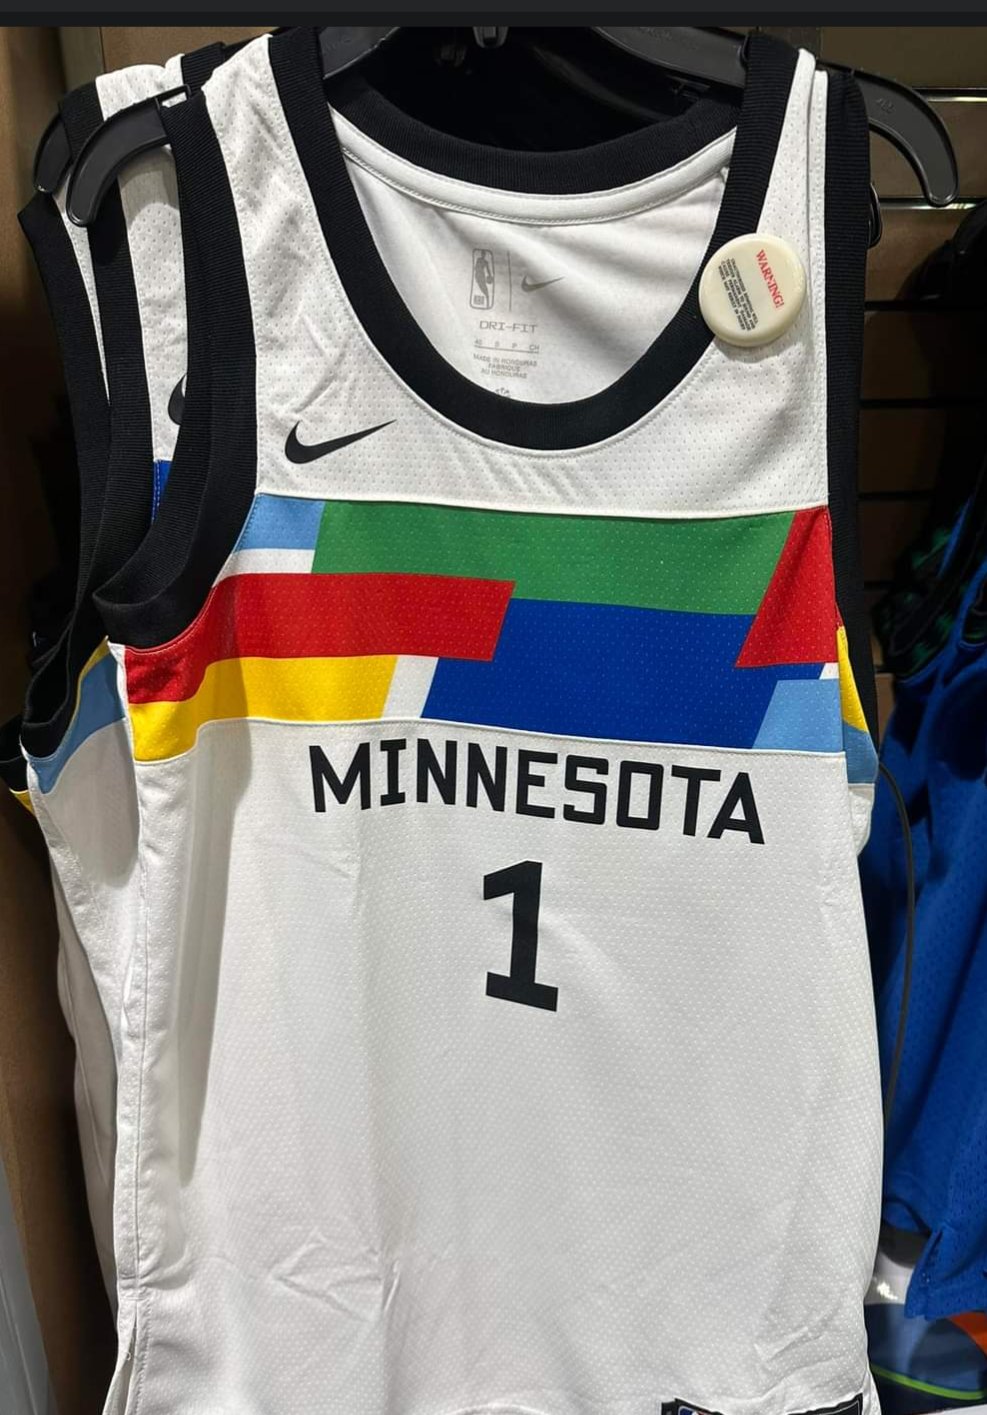 A photo of the new Thunder “City Edition” jerseys may have leaked